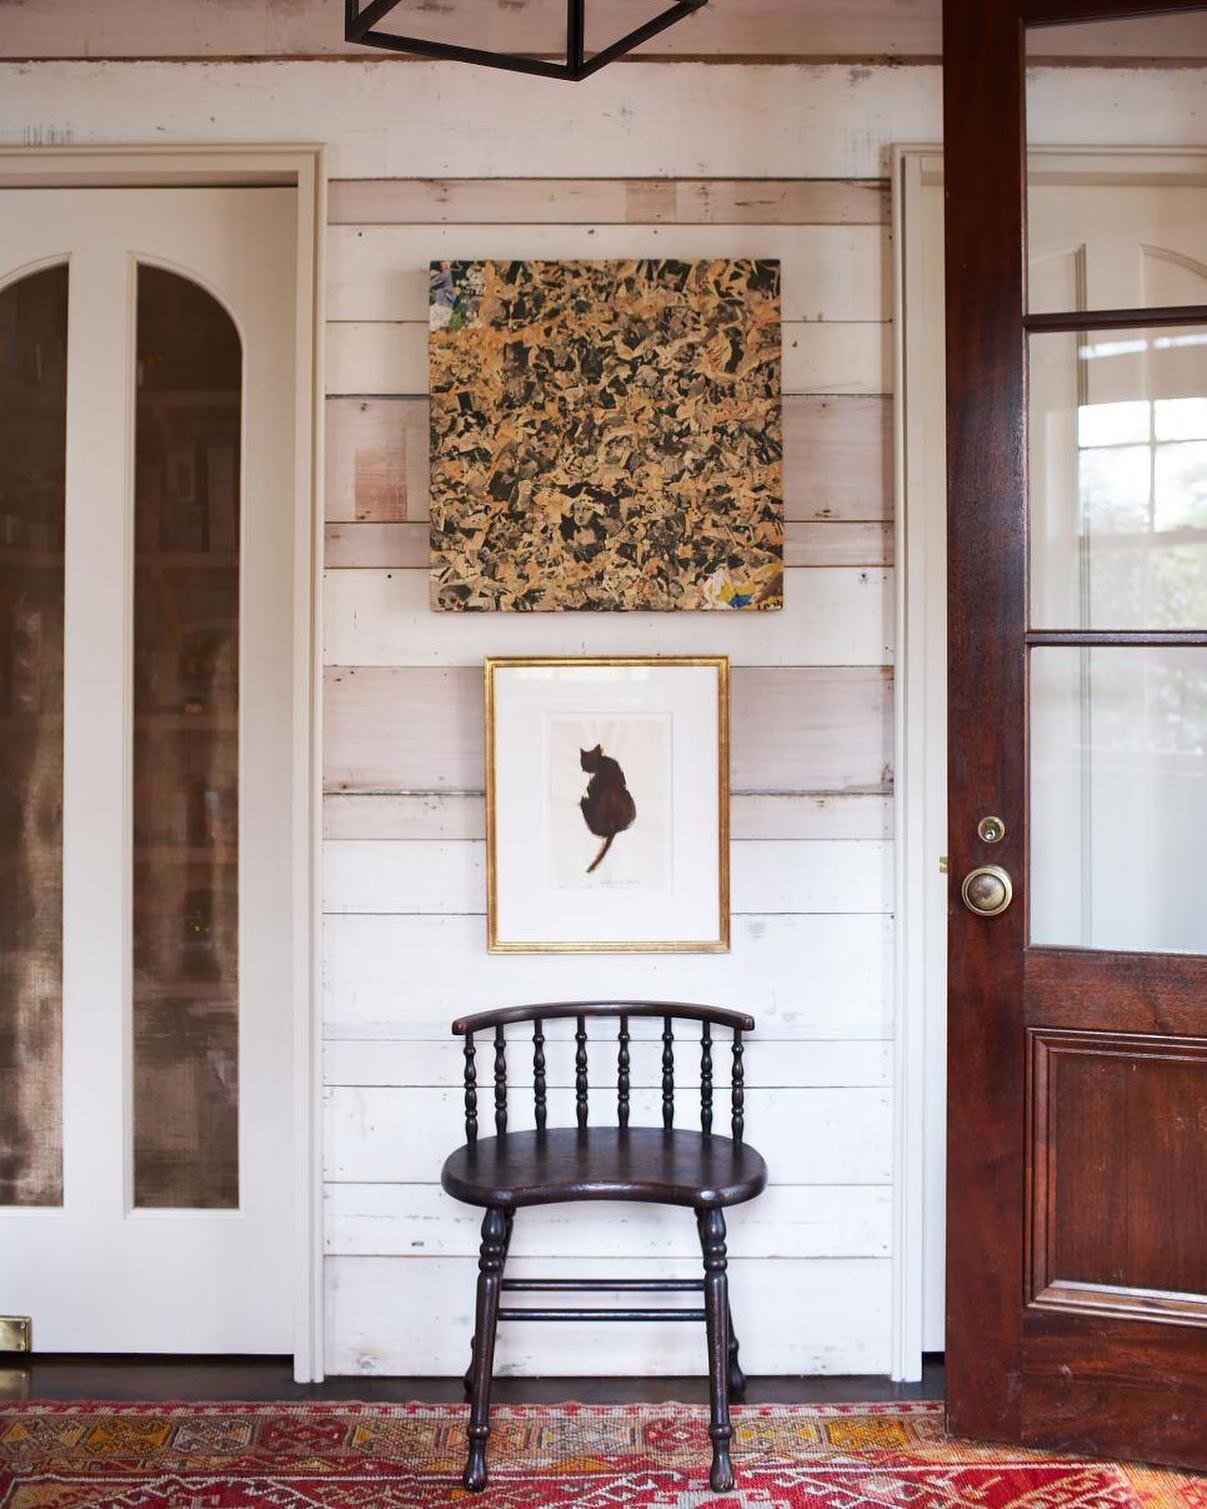 By all appearances this entryway could be original to the home, but it's actually part of the updated additions. To create the effect, we used the home's original wood boards, recovered from demolition, and added custom doors and a paneled coat close